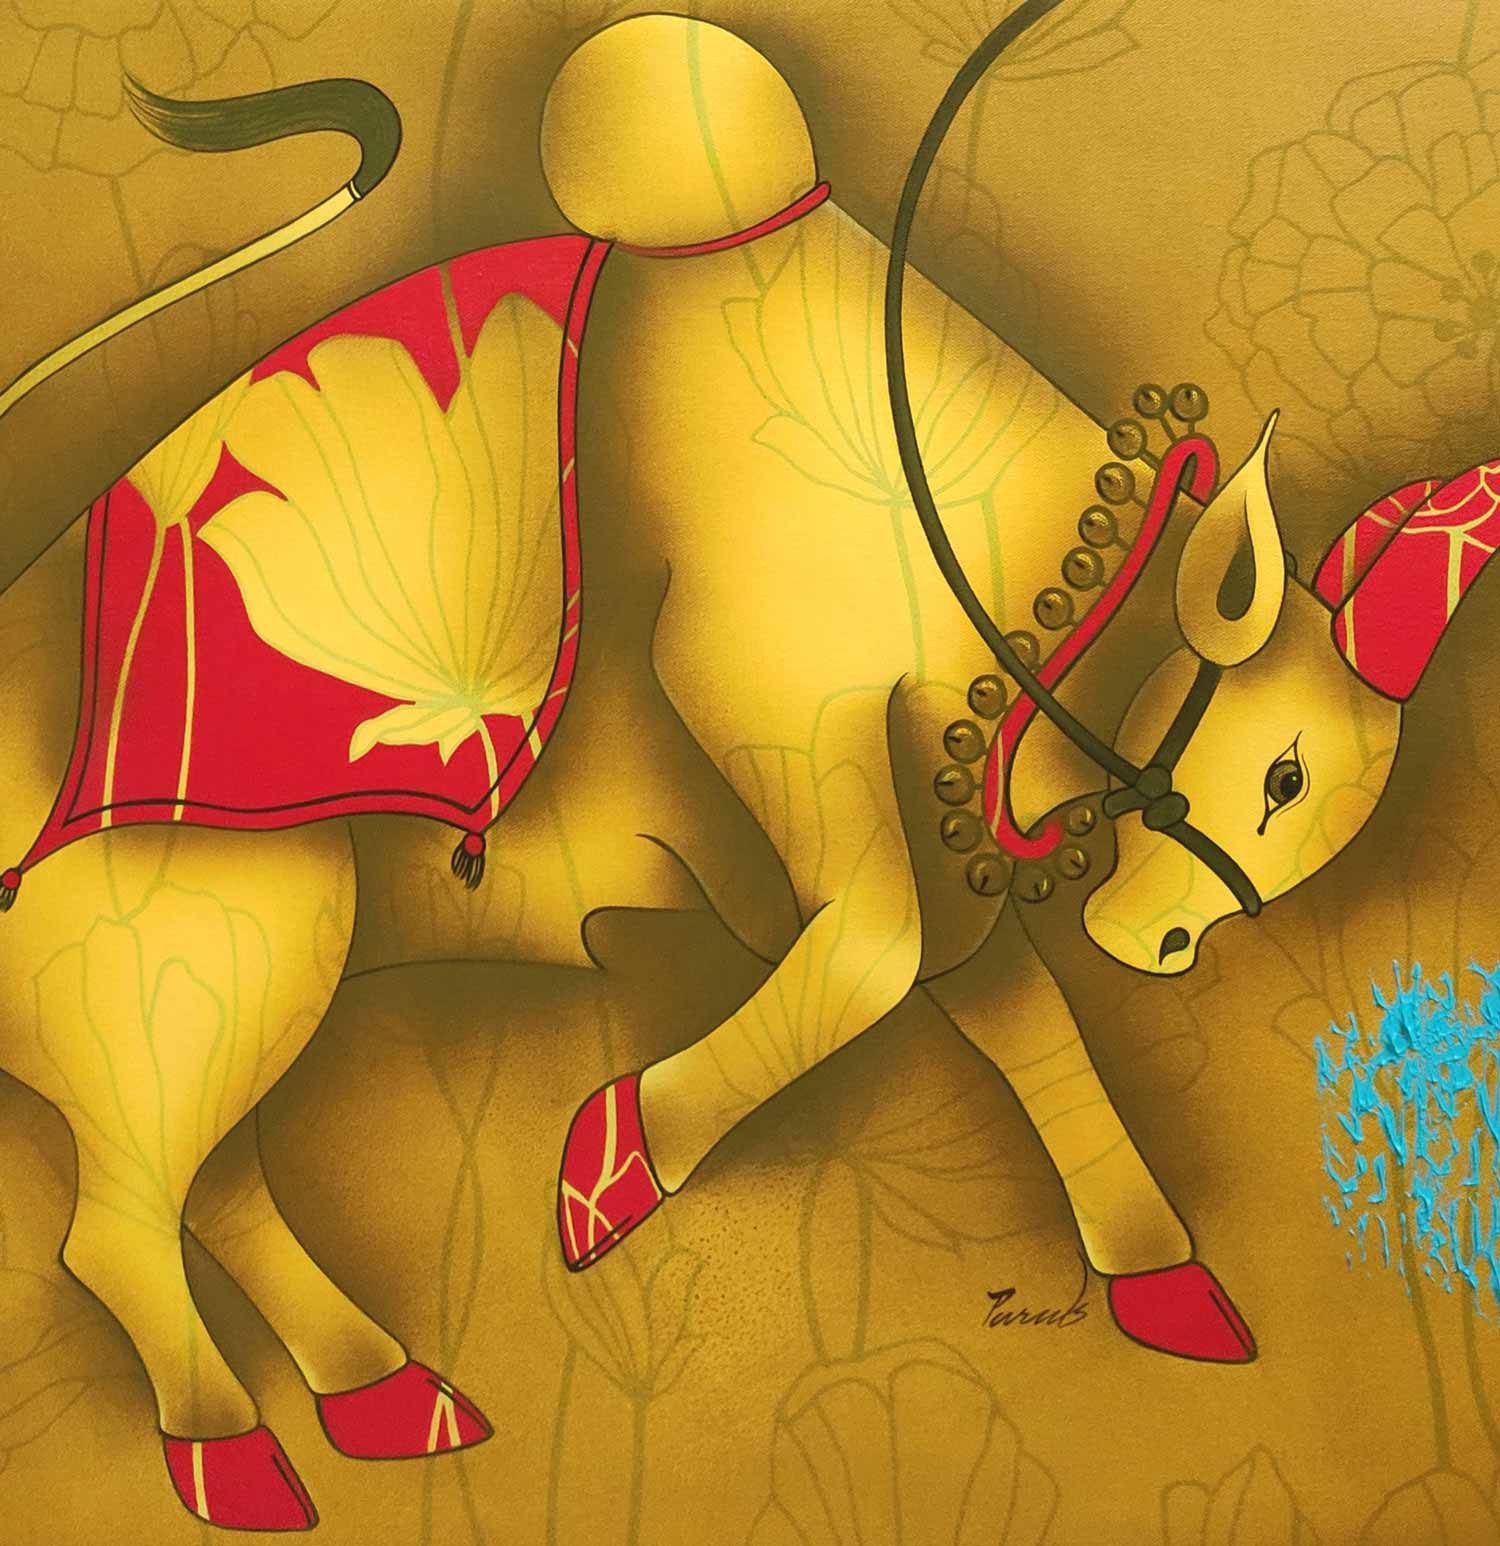 Figurative Painting with Acrylic on Canvas "Nandi Bull-4" art by Paras Parmar